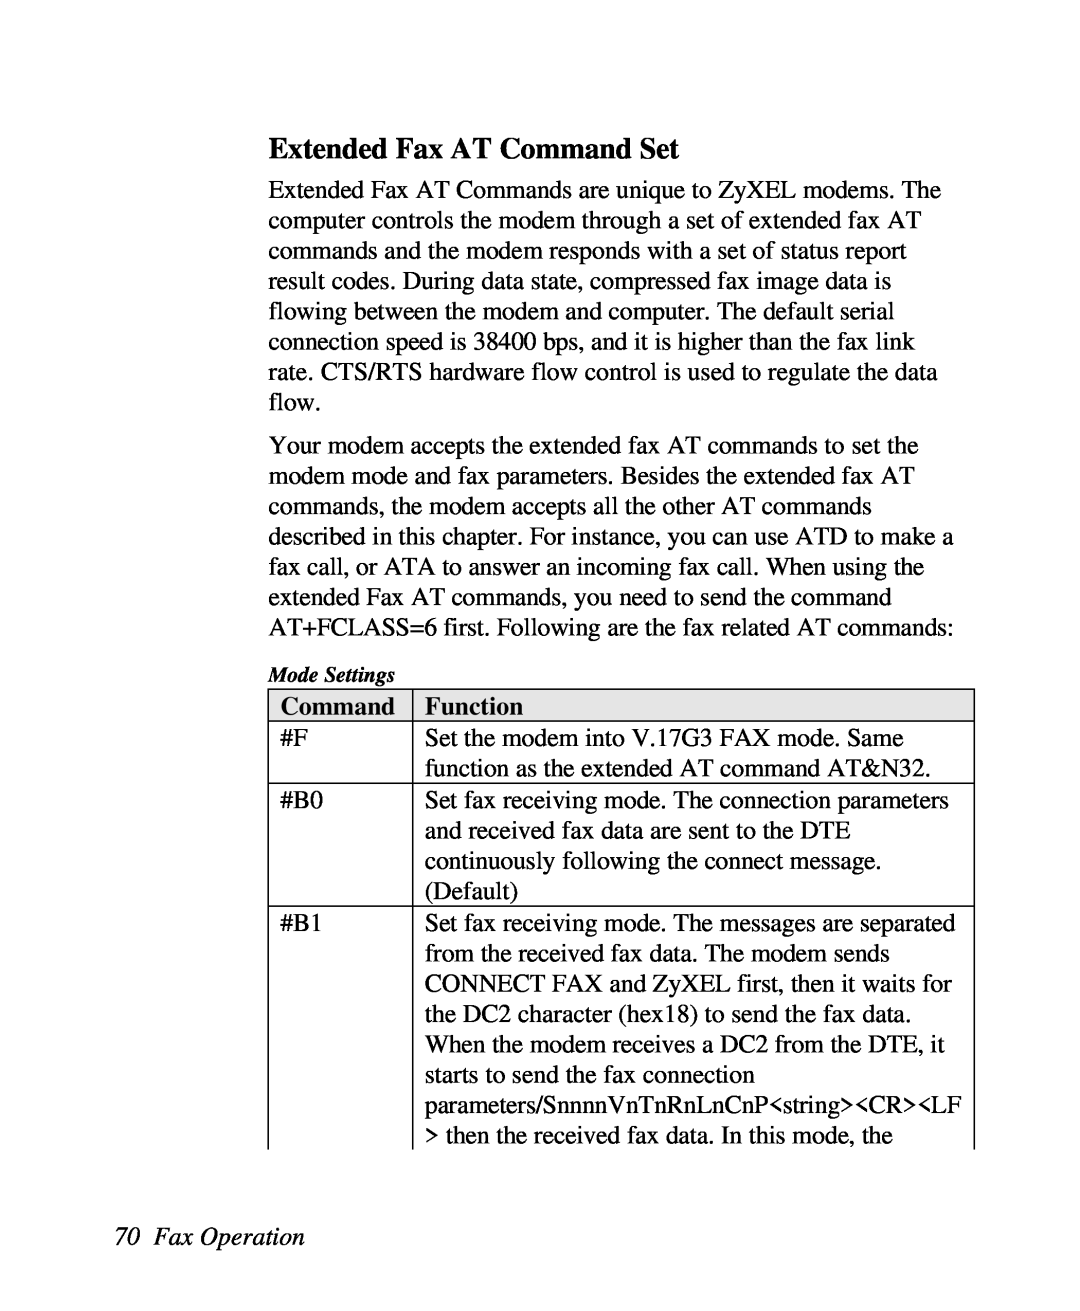 ZyXEL Communications U-336R/RE manual Extended Fax AT Command Set, Fax Operation 